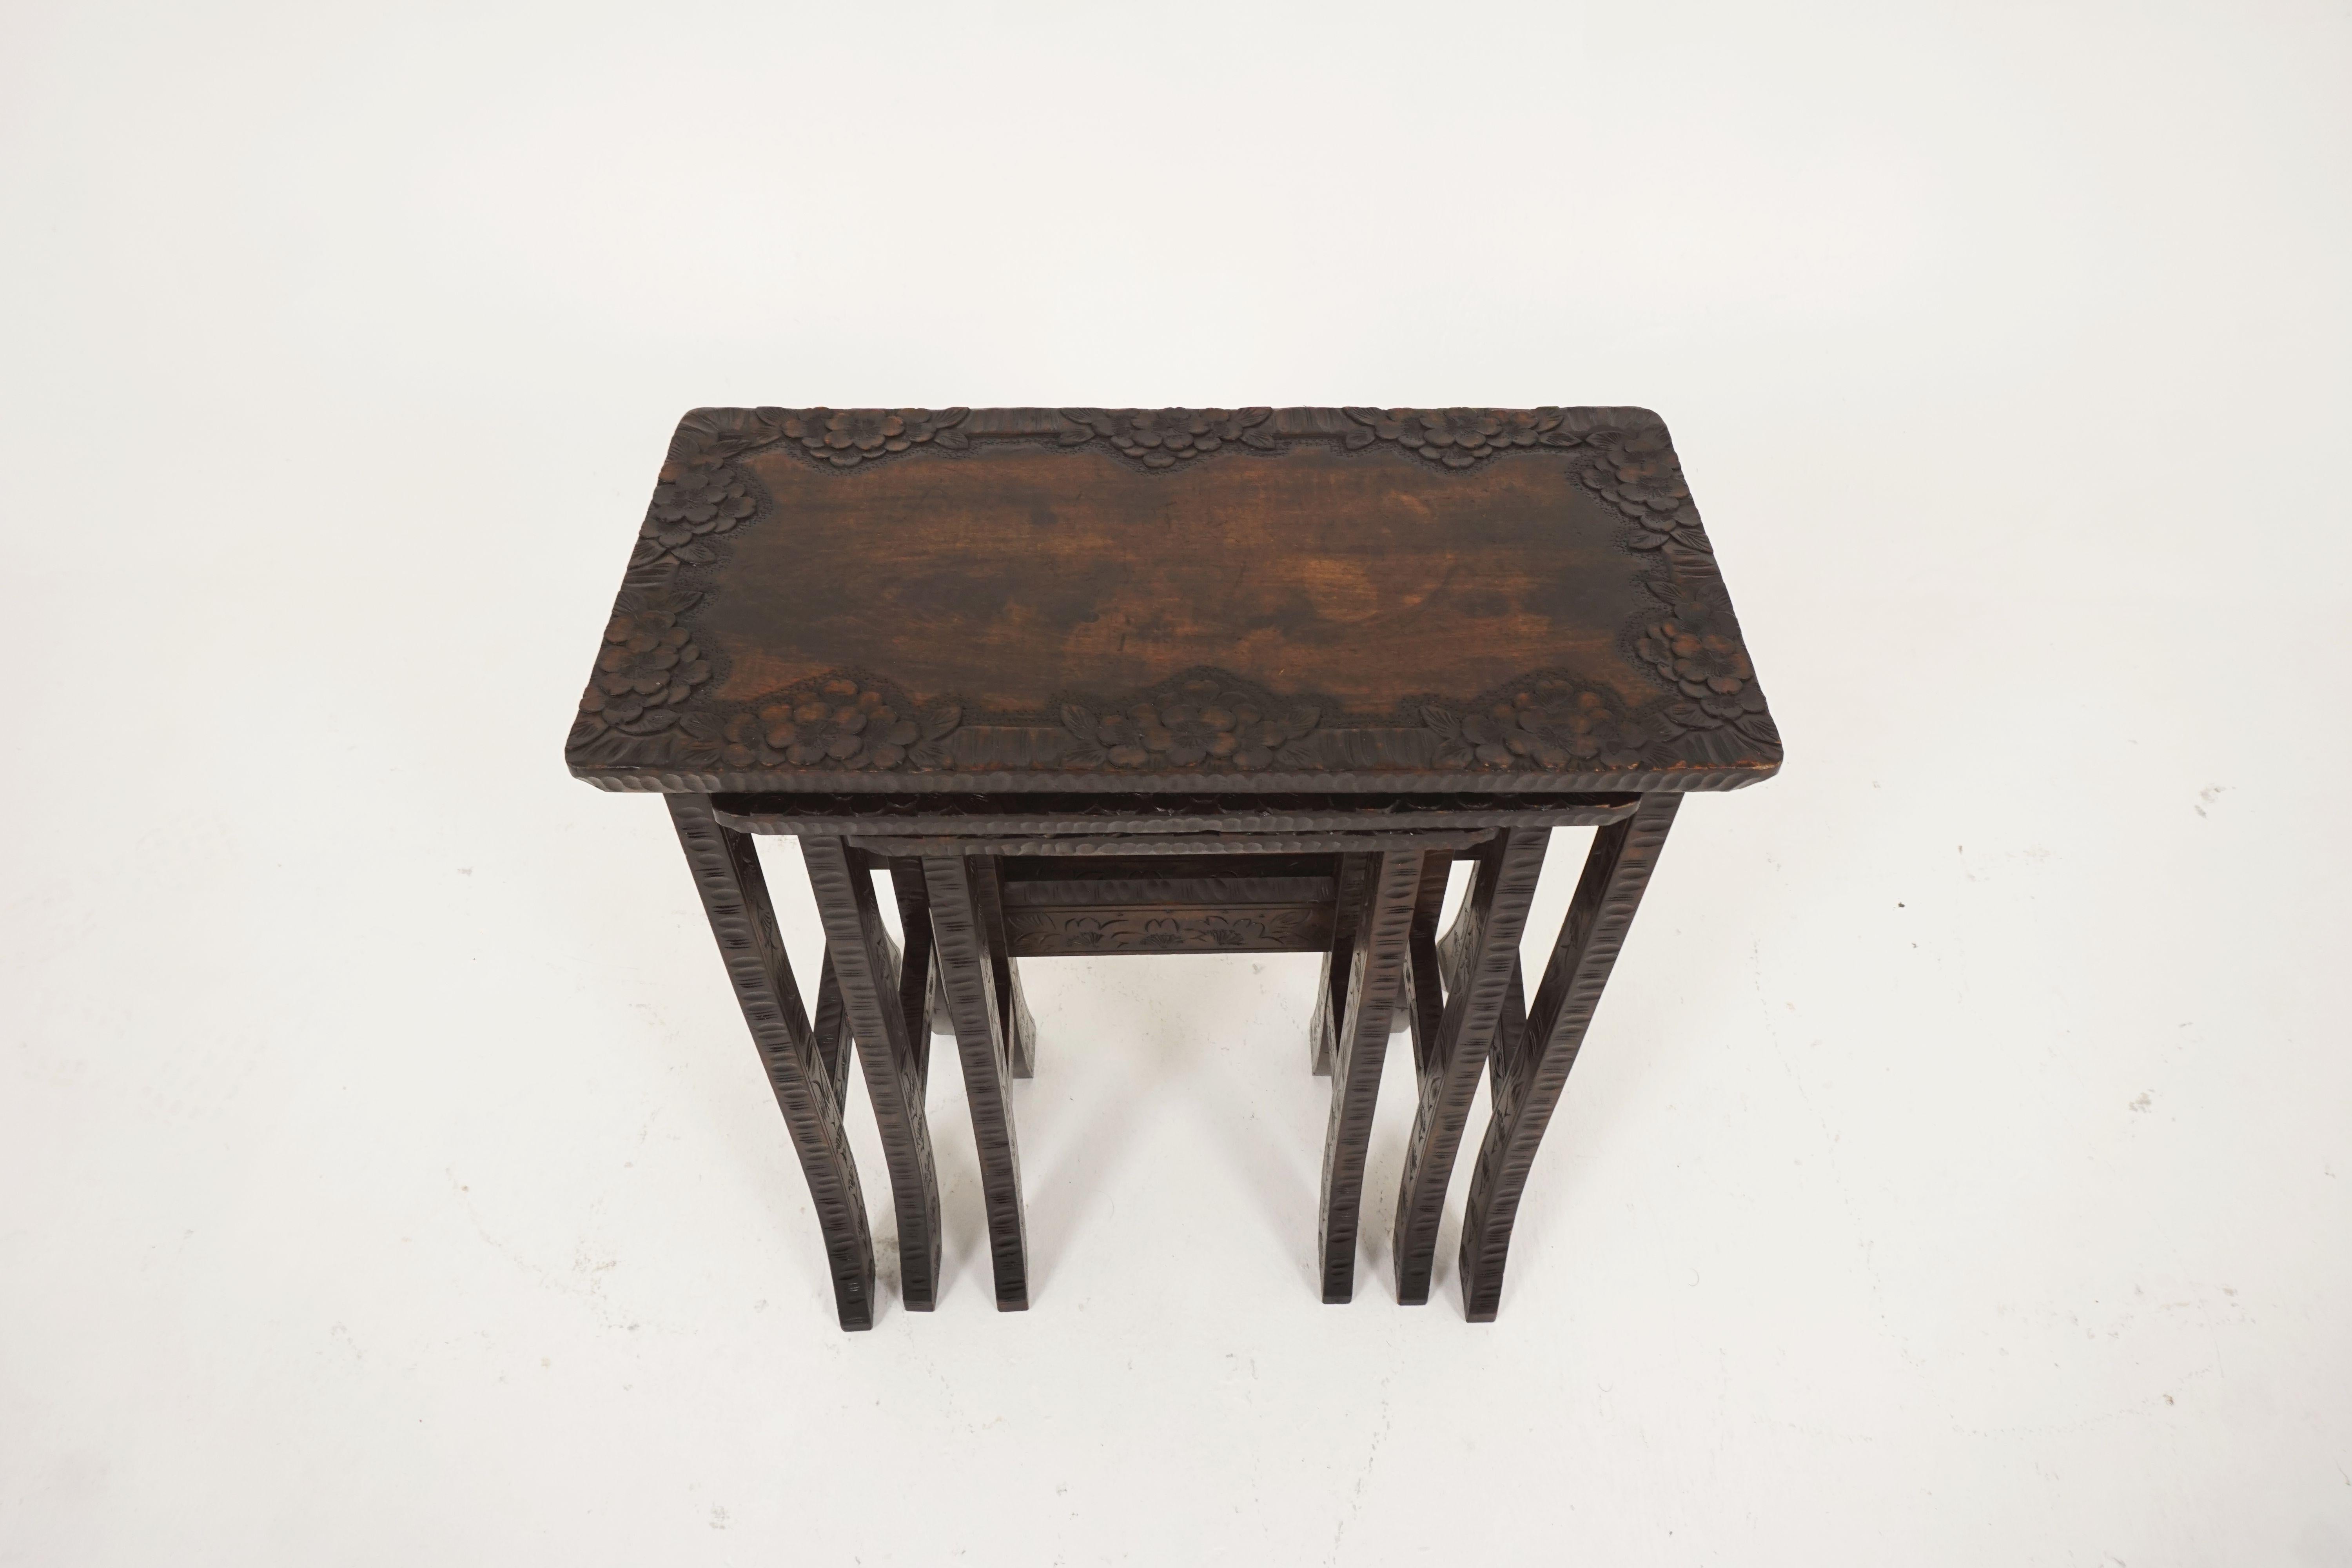 Antique carved Liberty + Co, Asian nesting tables, solid wood, Asia, 1920

Asia, 1920
Solid wood
Original finish
Rectangular top
Hand carved floral design
Carving on all tops
Carved down swept legs on front and side
Joined by carved